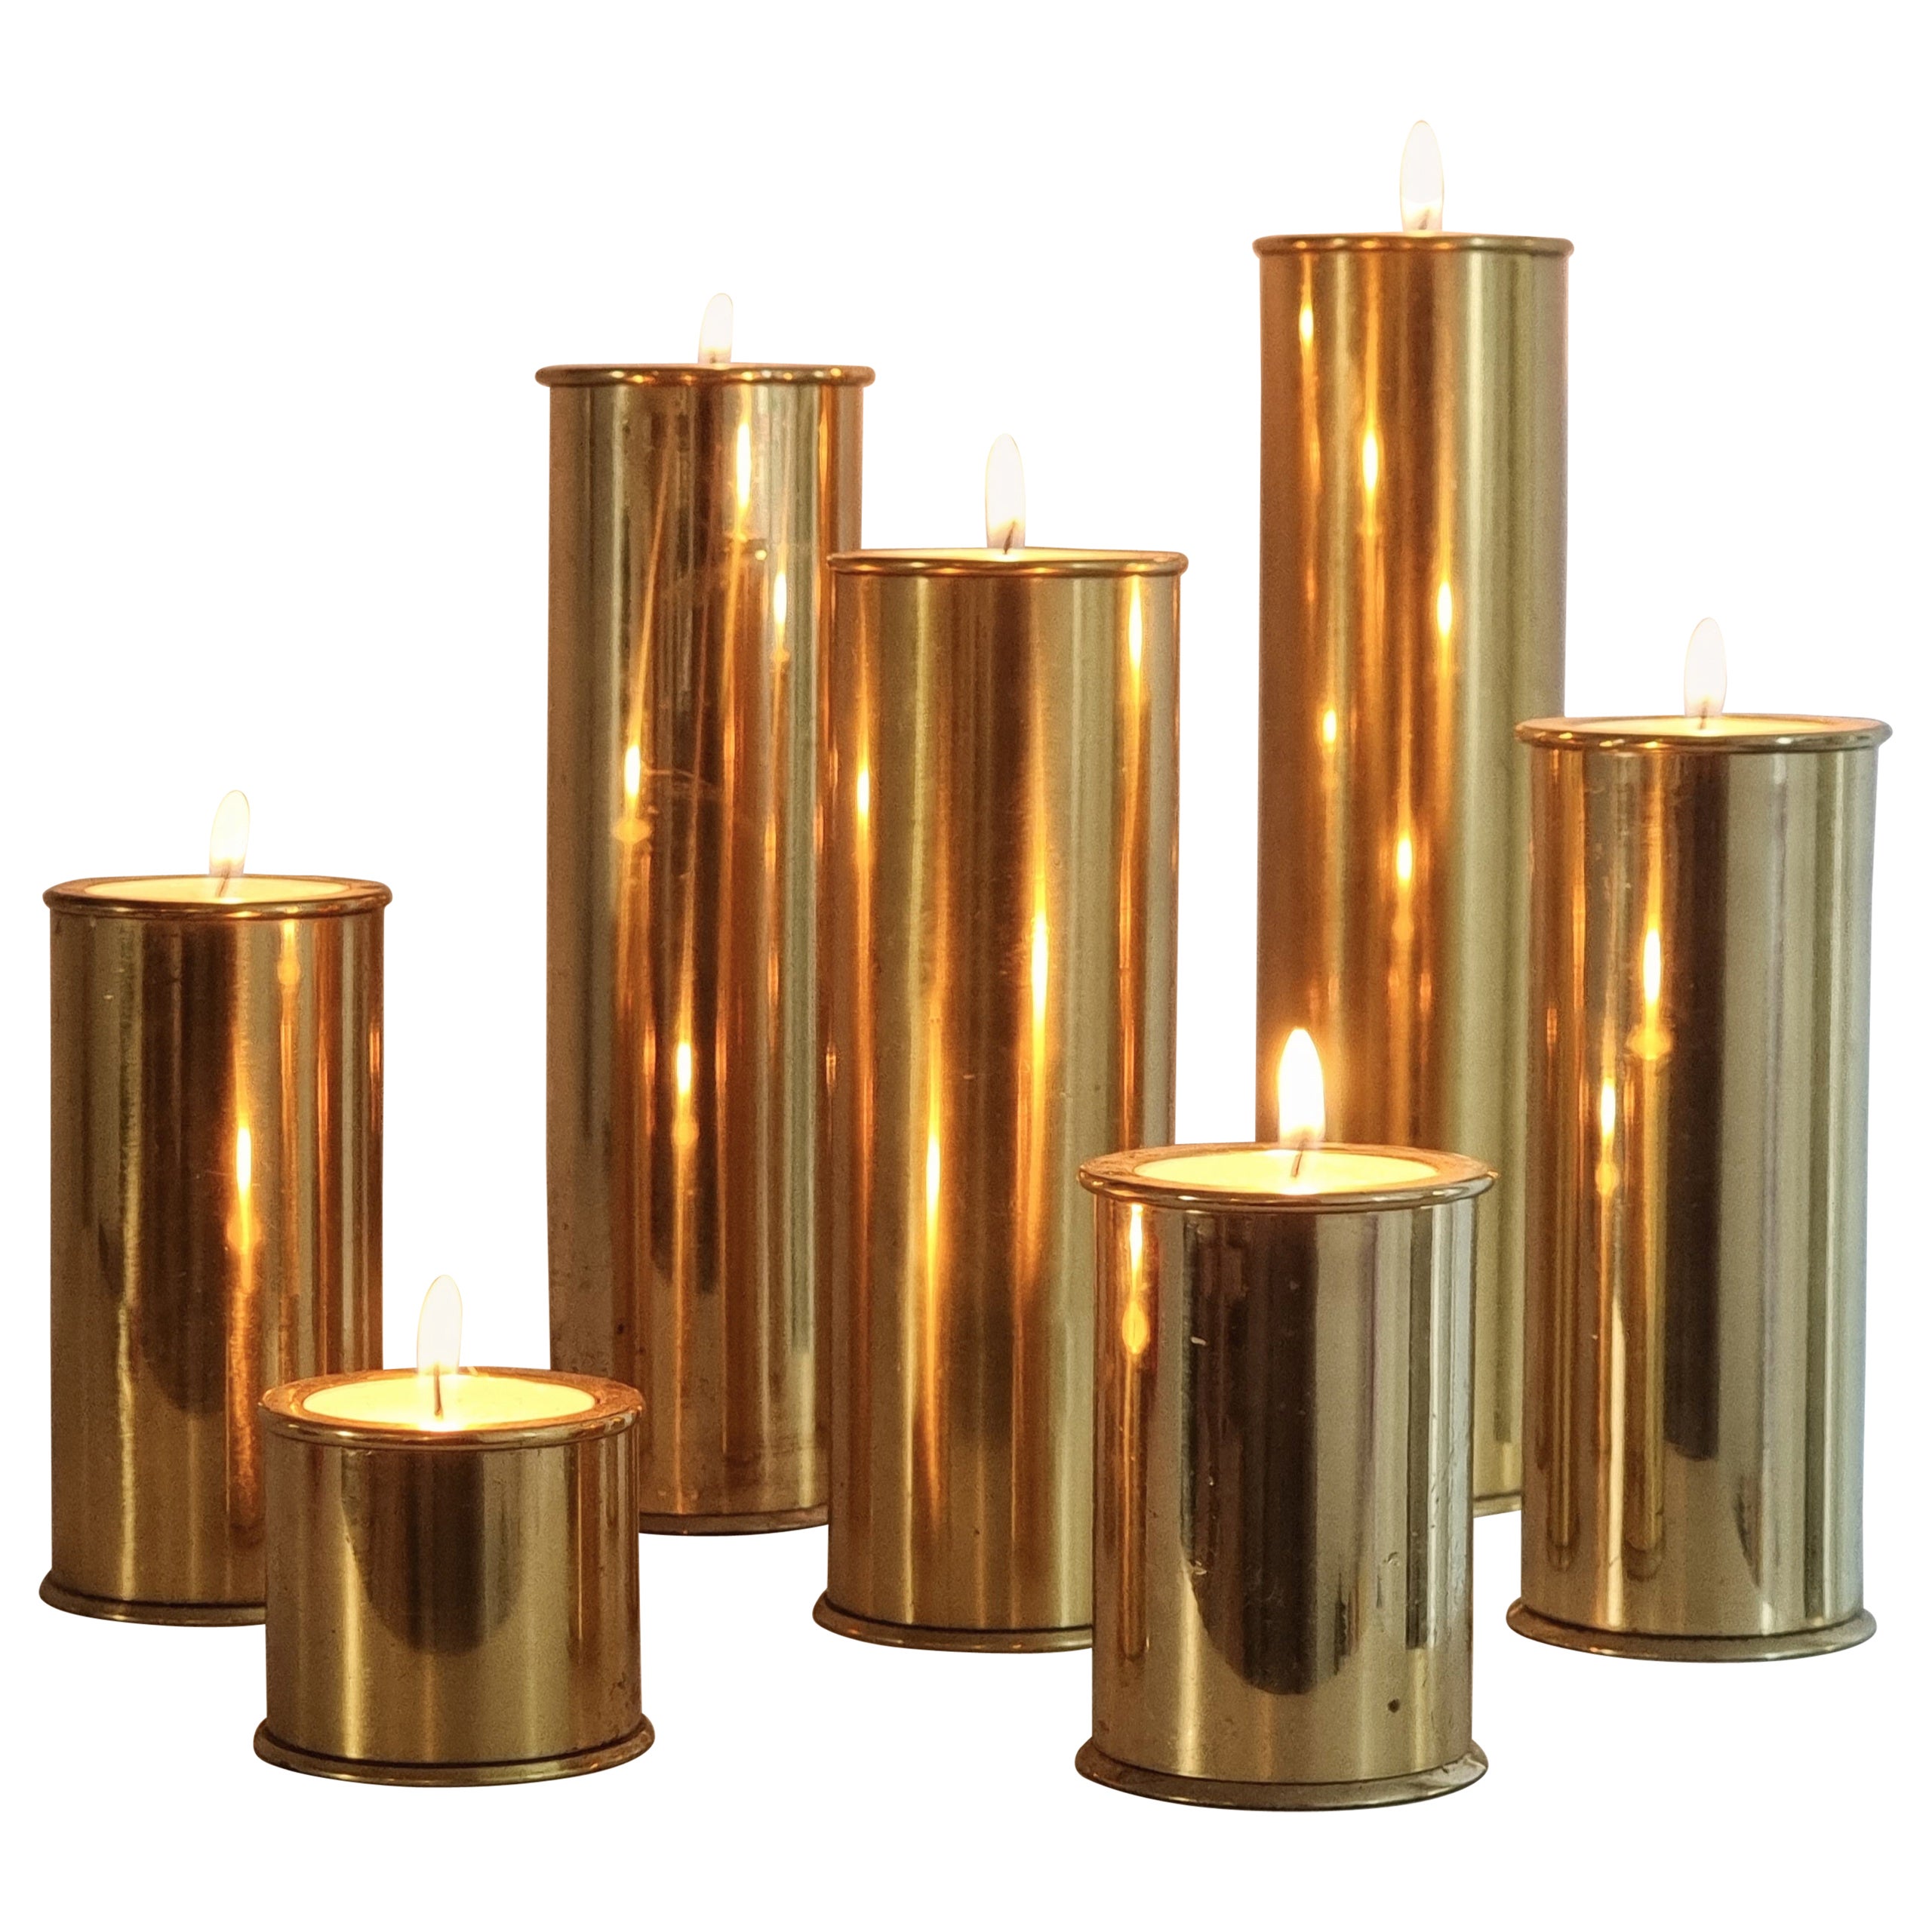 Stefan Englesson, Rare Seven Size Set, Candle Holders in Solid Brass, Sweden For Sale